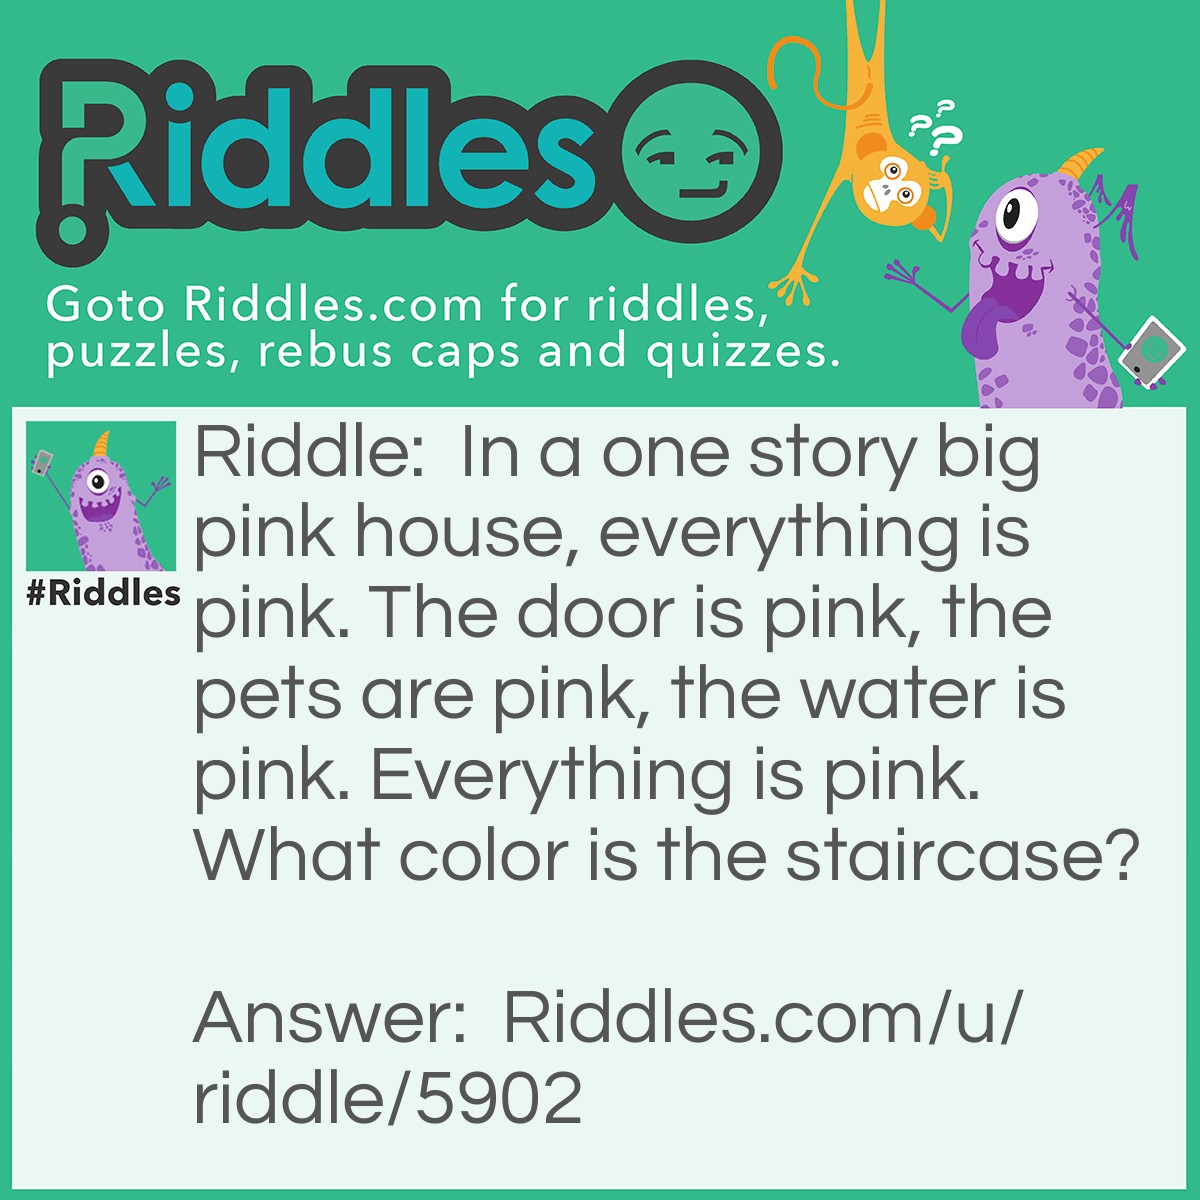 Riddle: In a one story big pink house, everything is pink. The door is pink, the pets are pink, the water is pink. Everything is pink. What color is the staircase? Answer: There is no staircase, it's a one story house.